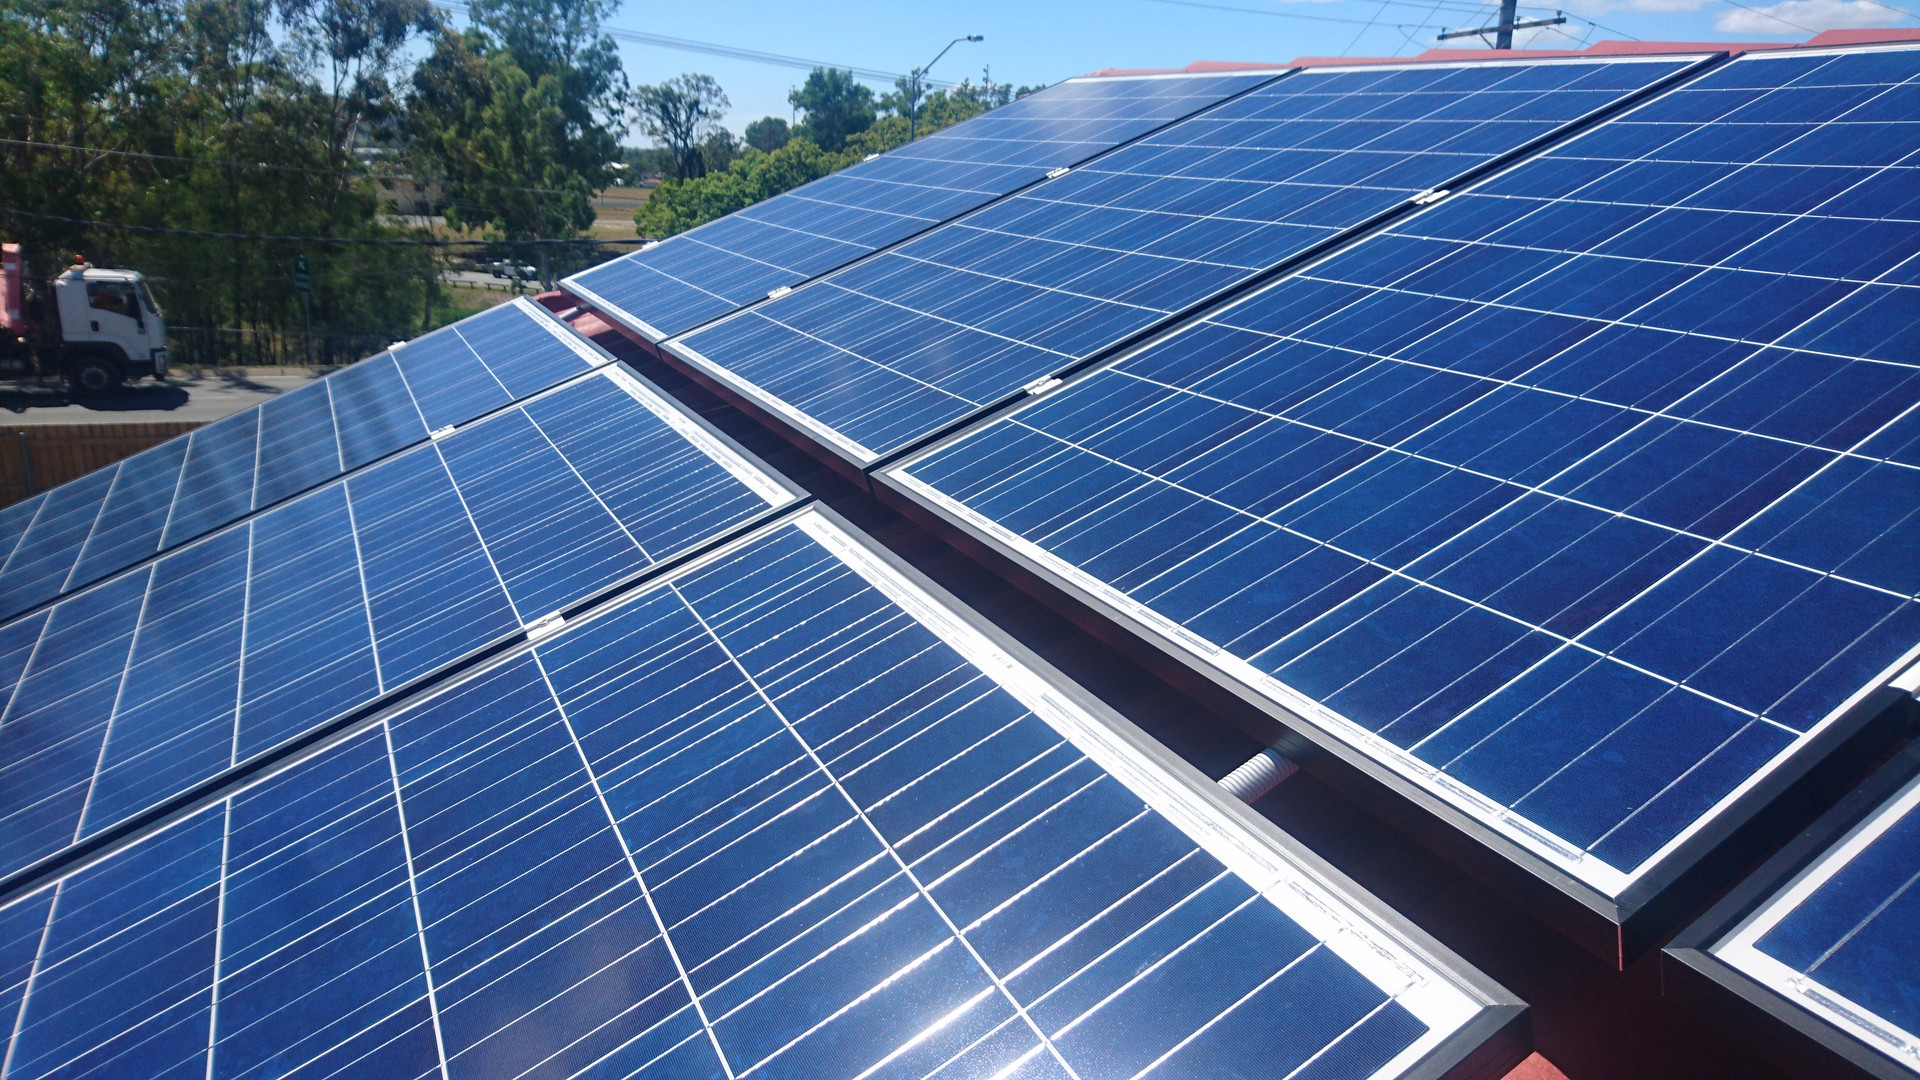 1920x1080  Whether it's solar panels for your home or business, Positronic Solar has  you covered. Positronic Solar has over 25 years experience in solar panel  ...